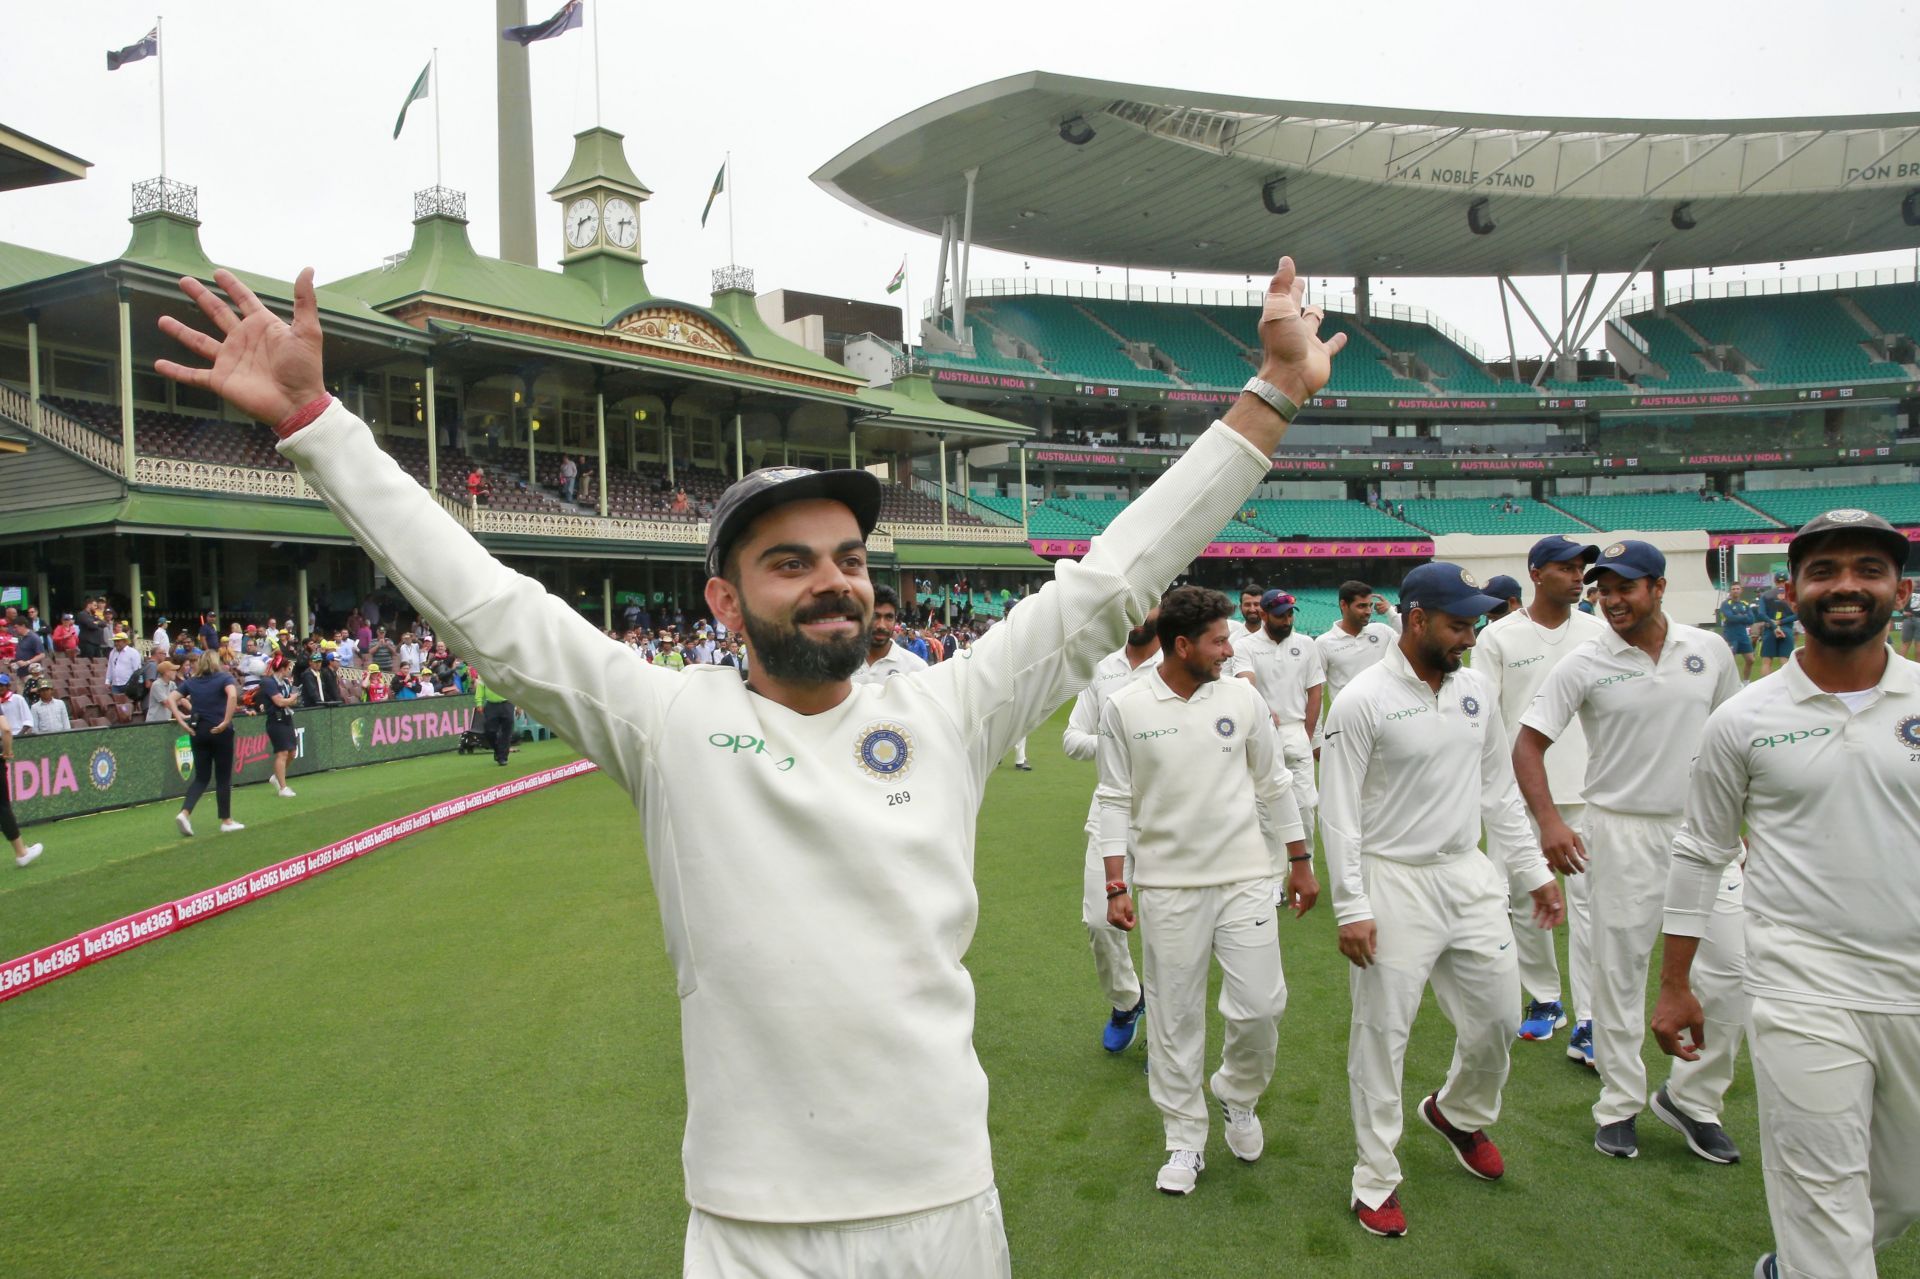 Kohli became the first Asian captain to seal a Test series victory on Australian soil during the 2018-19 tour.